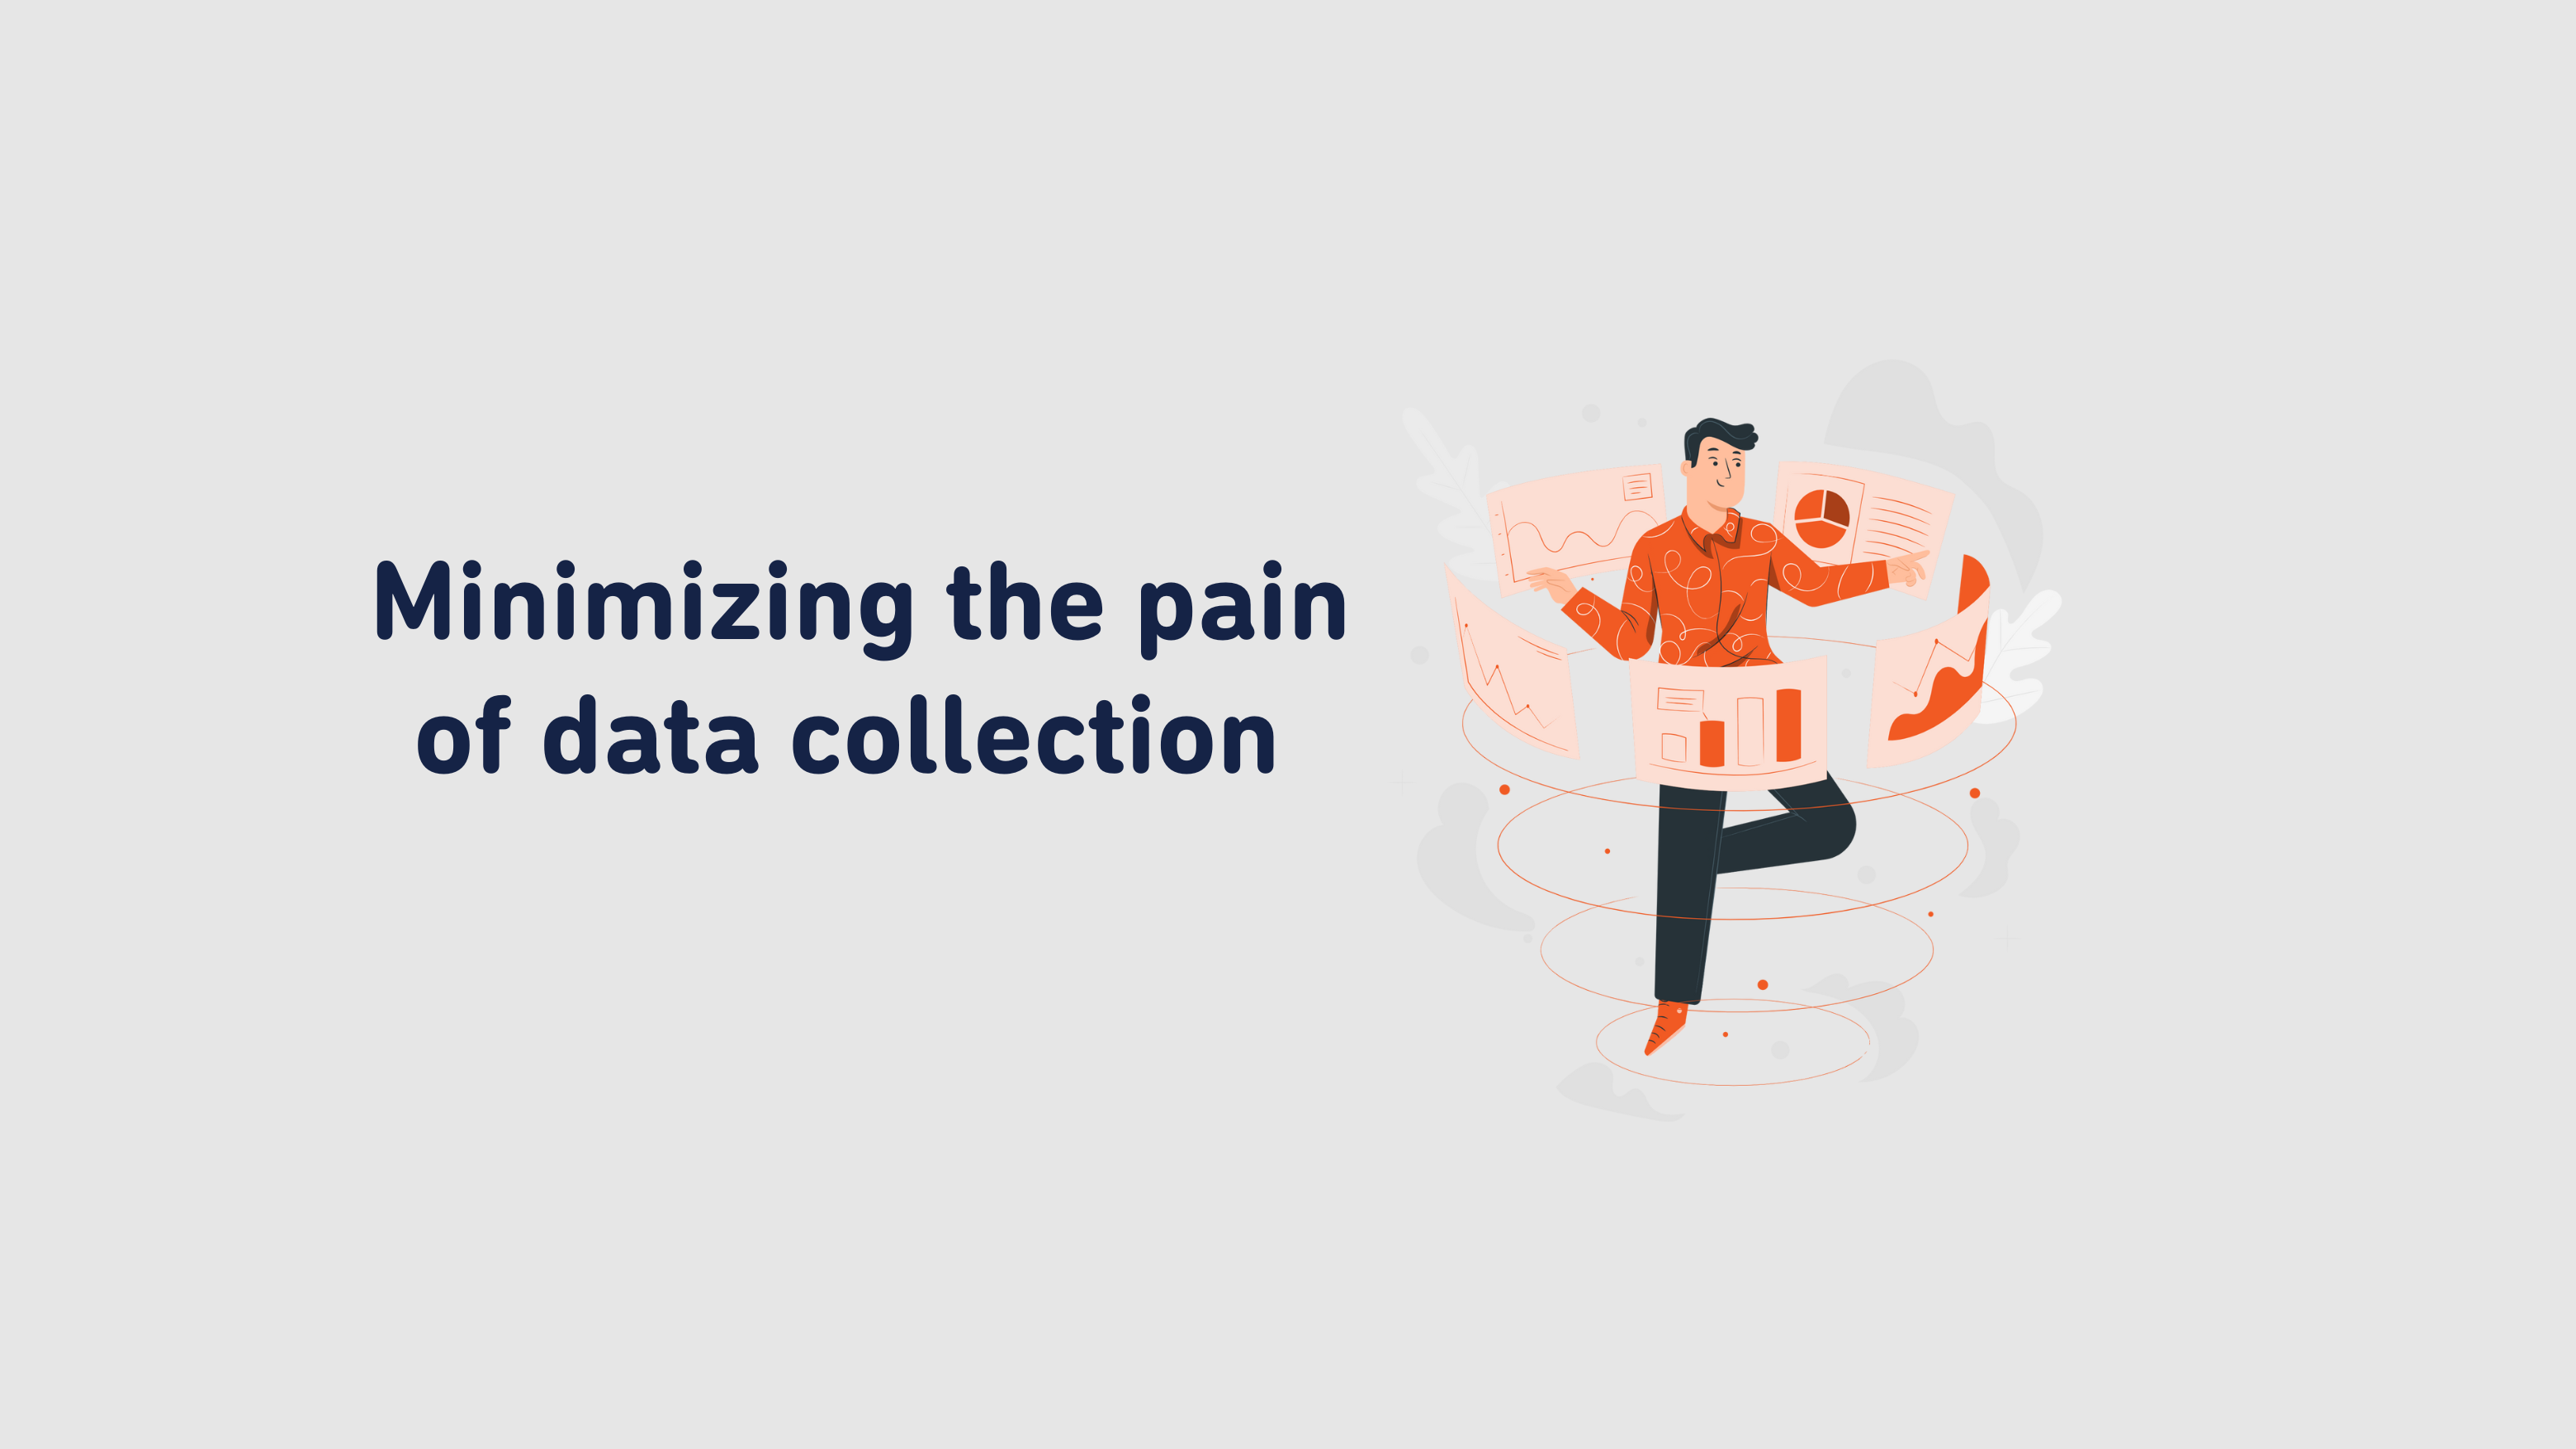 Minimizing the pain of data collection